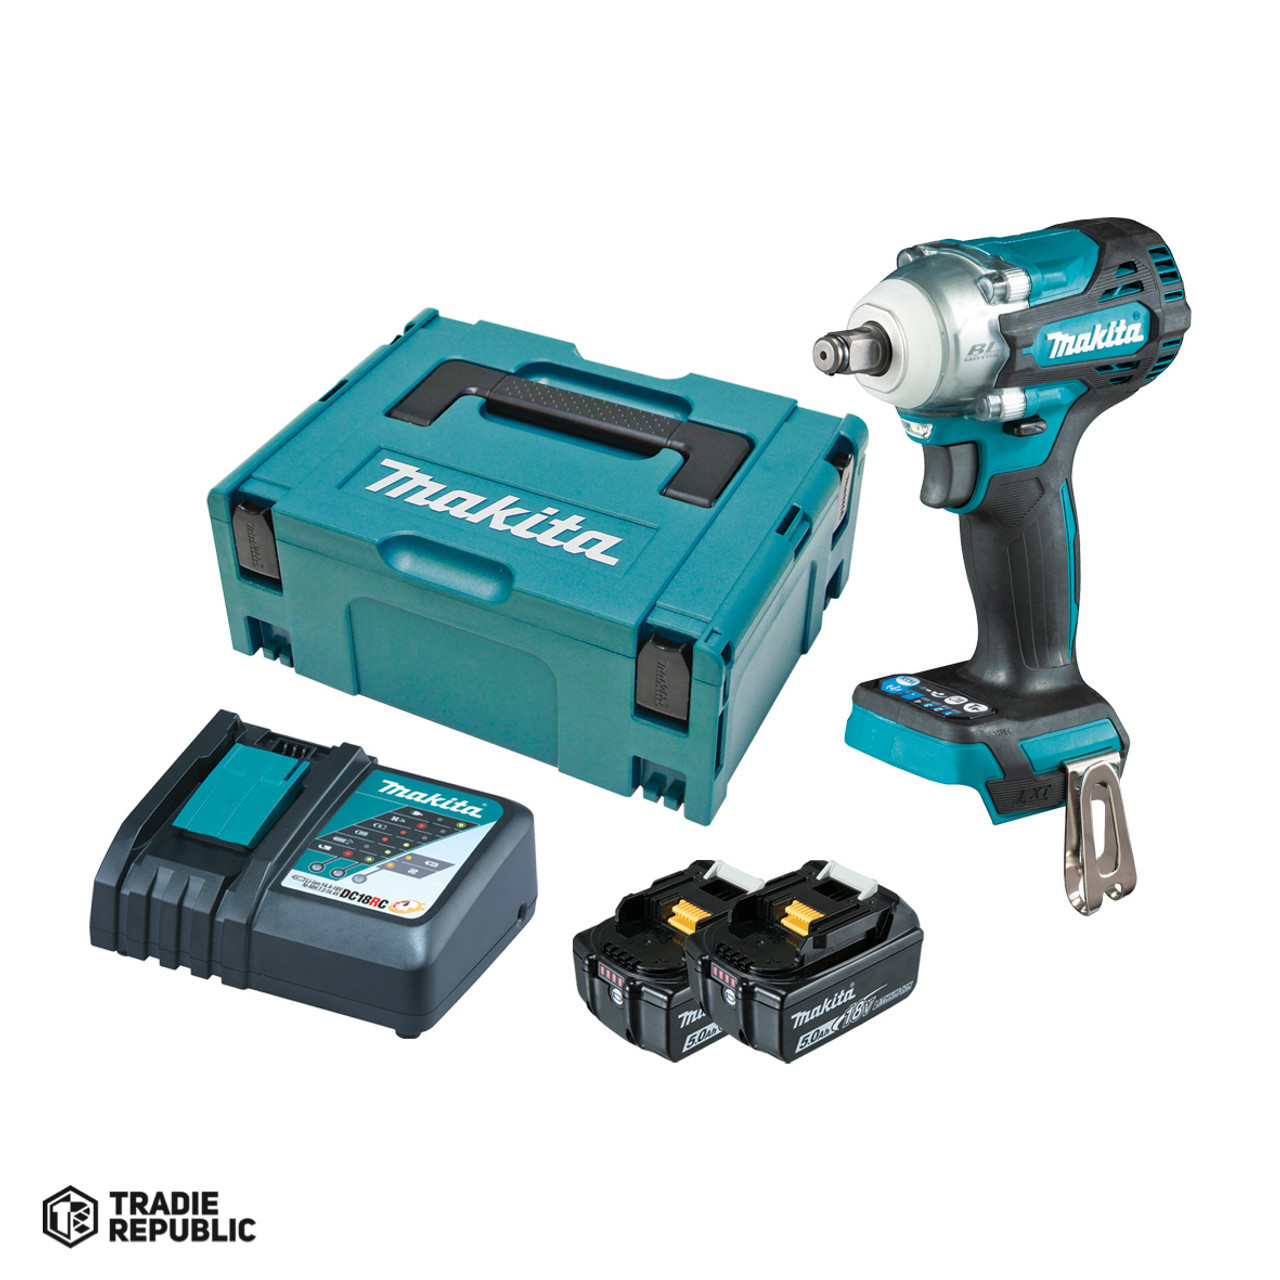 DTW300RTJ Makita 18V LXT Brushless 3-Speed 1/2 Sq. Drive Impact Wrench, Kit (5.0Ah) w/Makpac